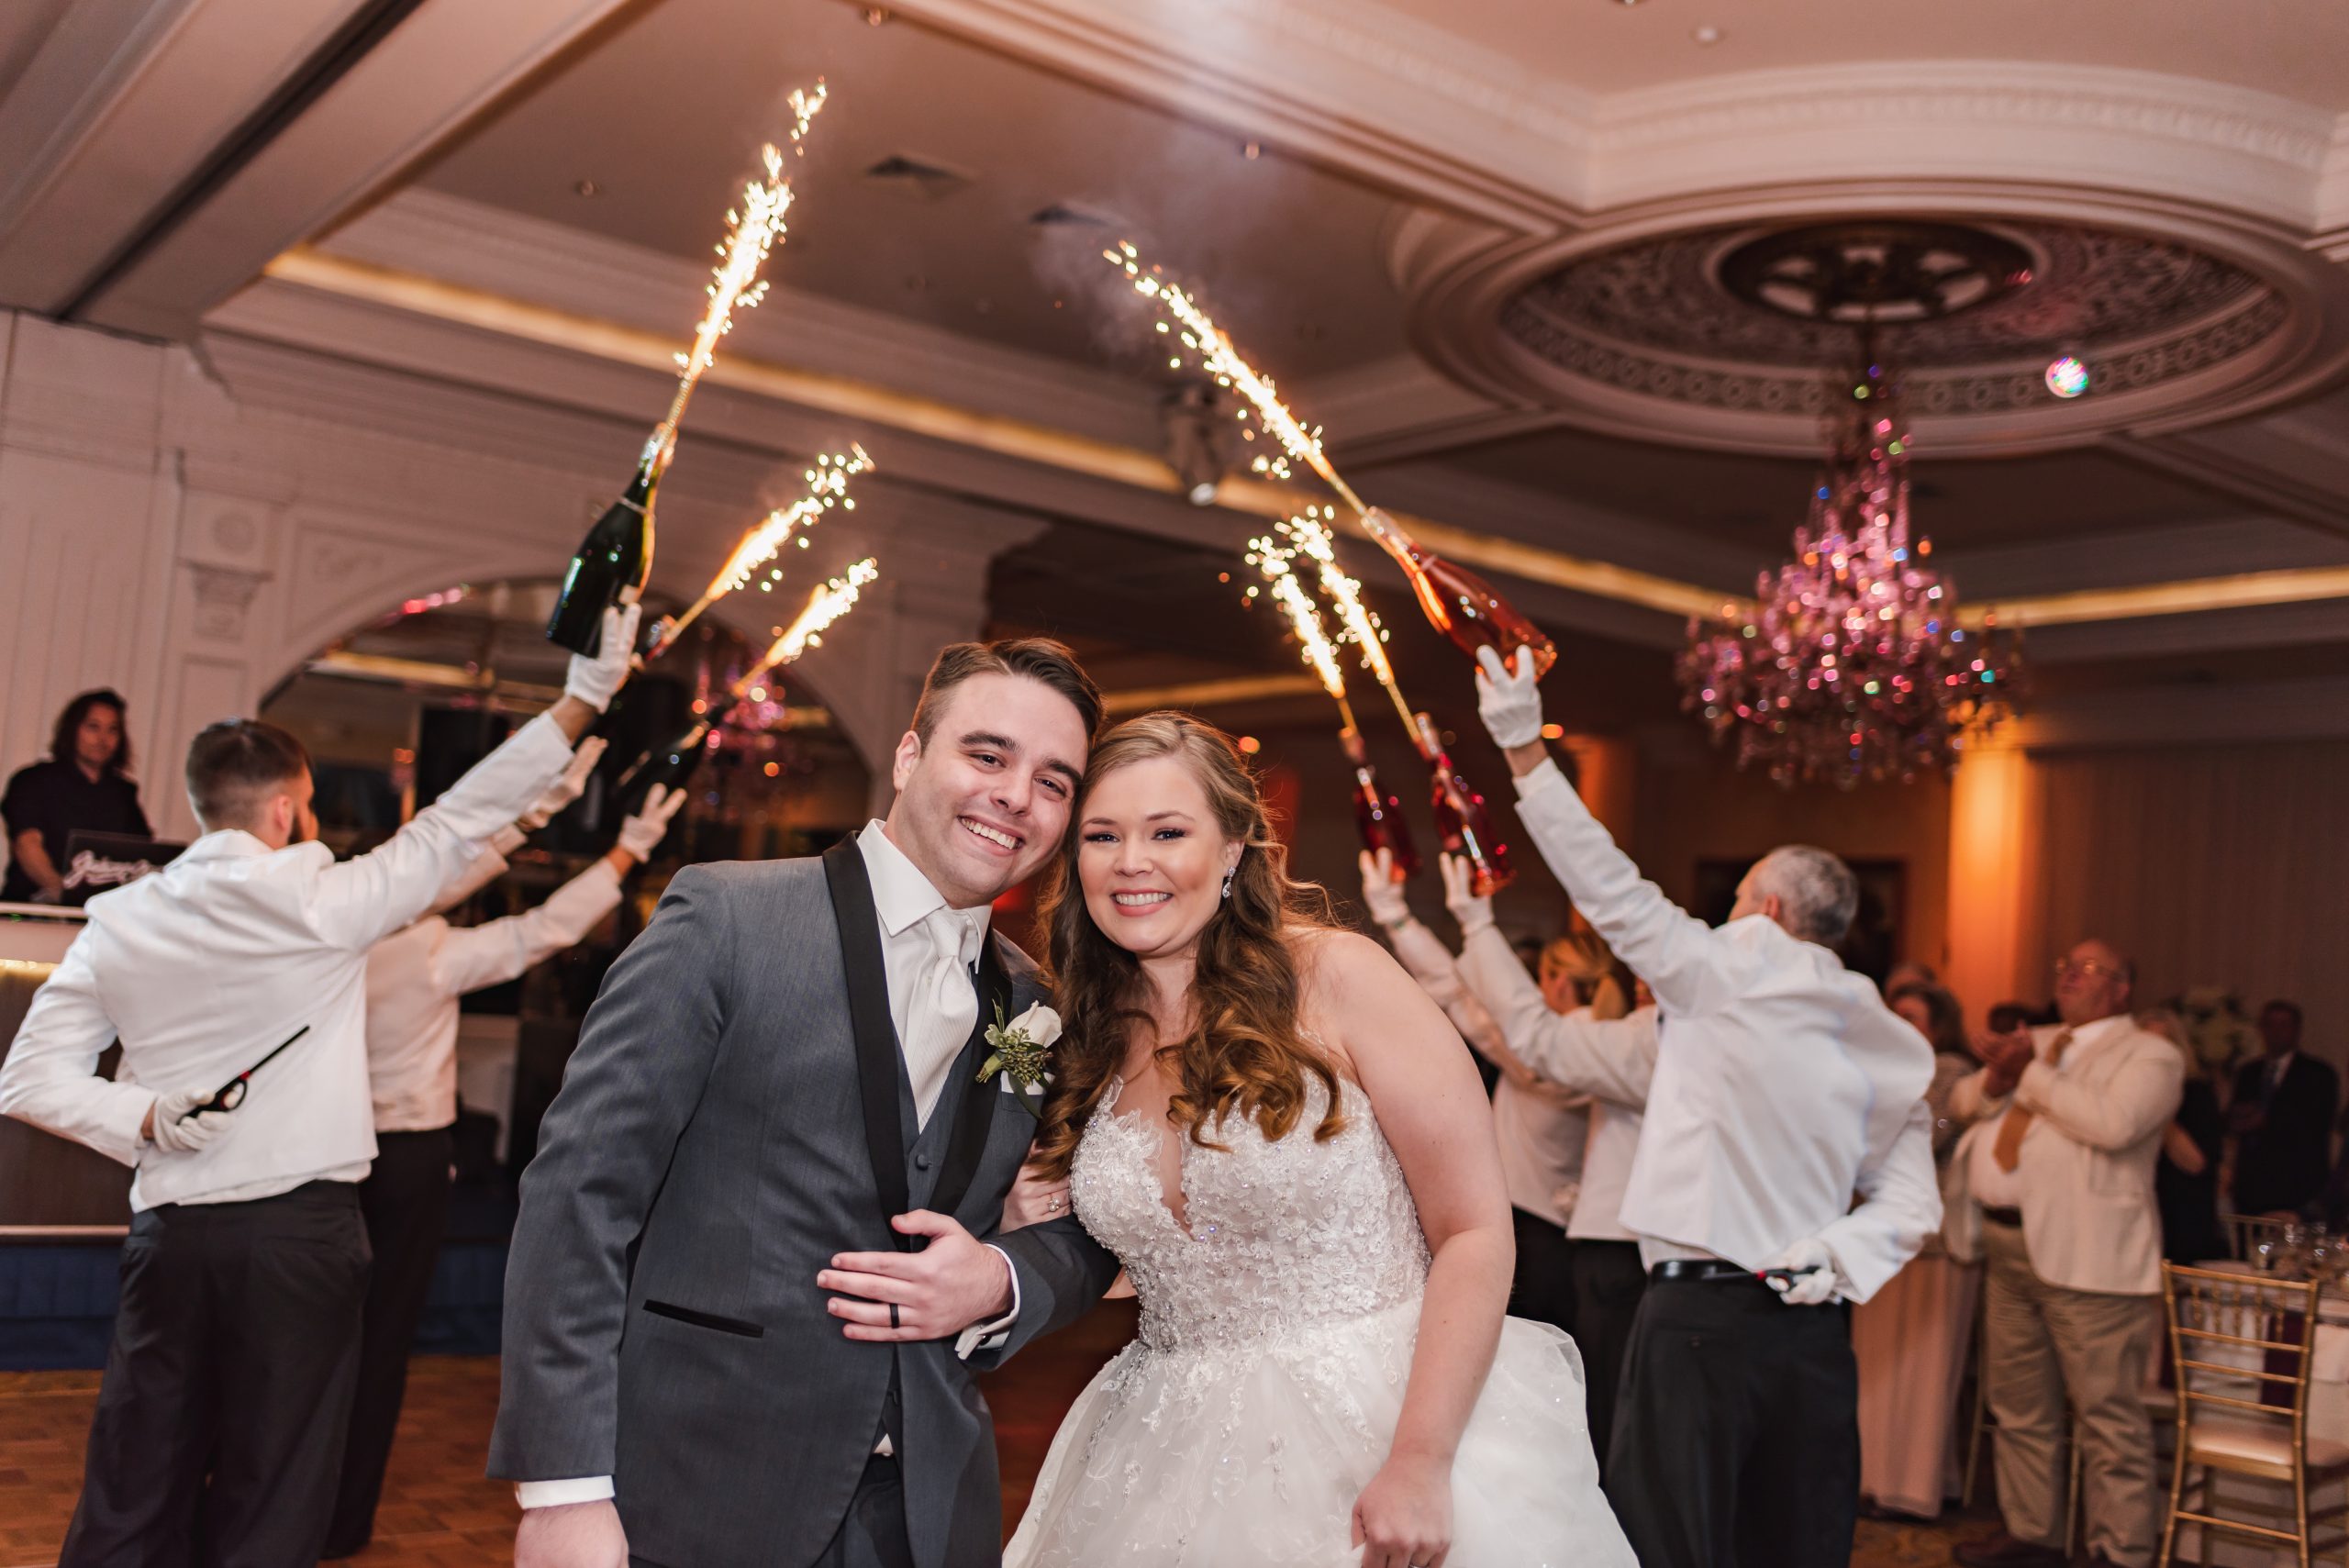 bottle-sparklers-at-wedding-reception-new-jersey-eagle-oaks-country-club-suessmoments-photography